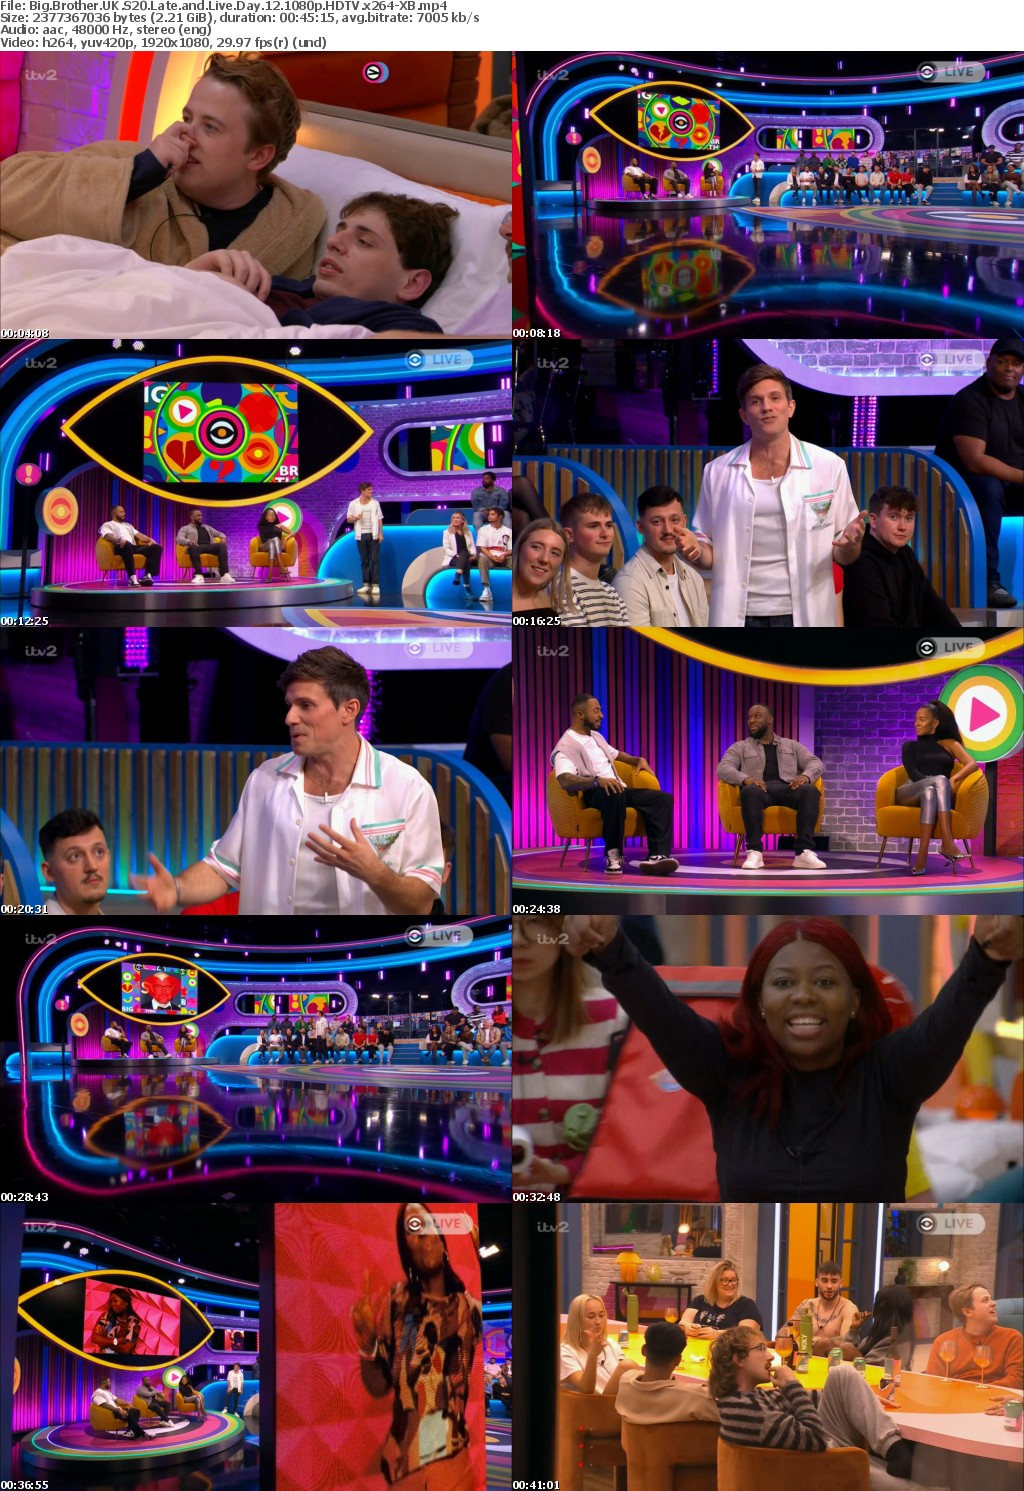 Big Brother UK S20 Late and Live Day 12 1080p HDTV x264-XB